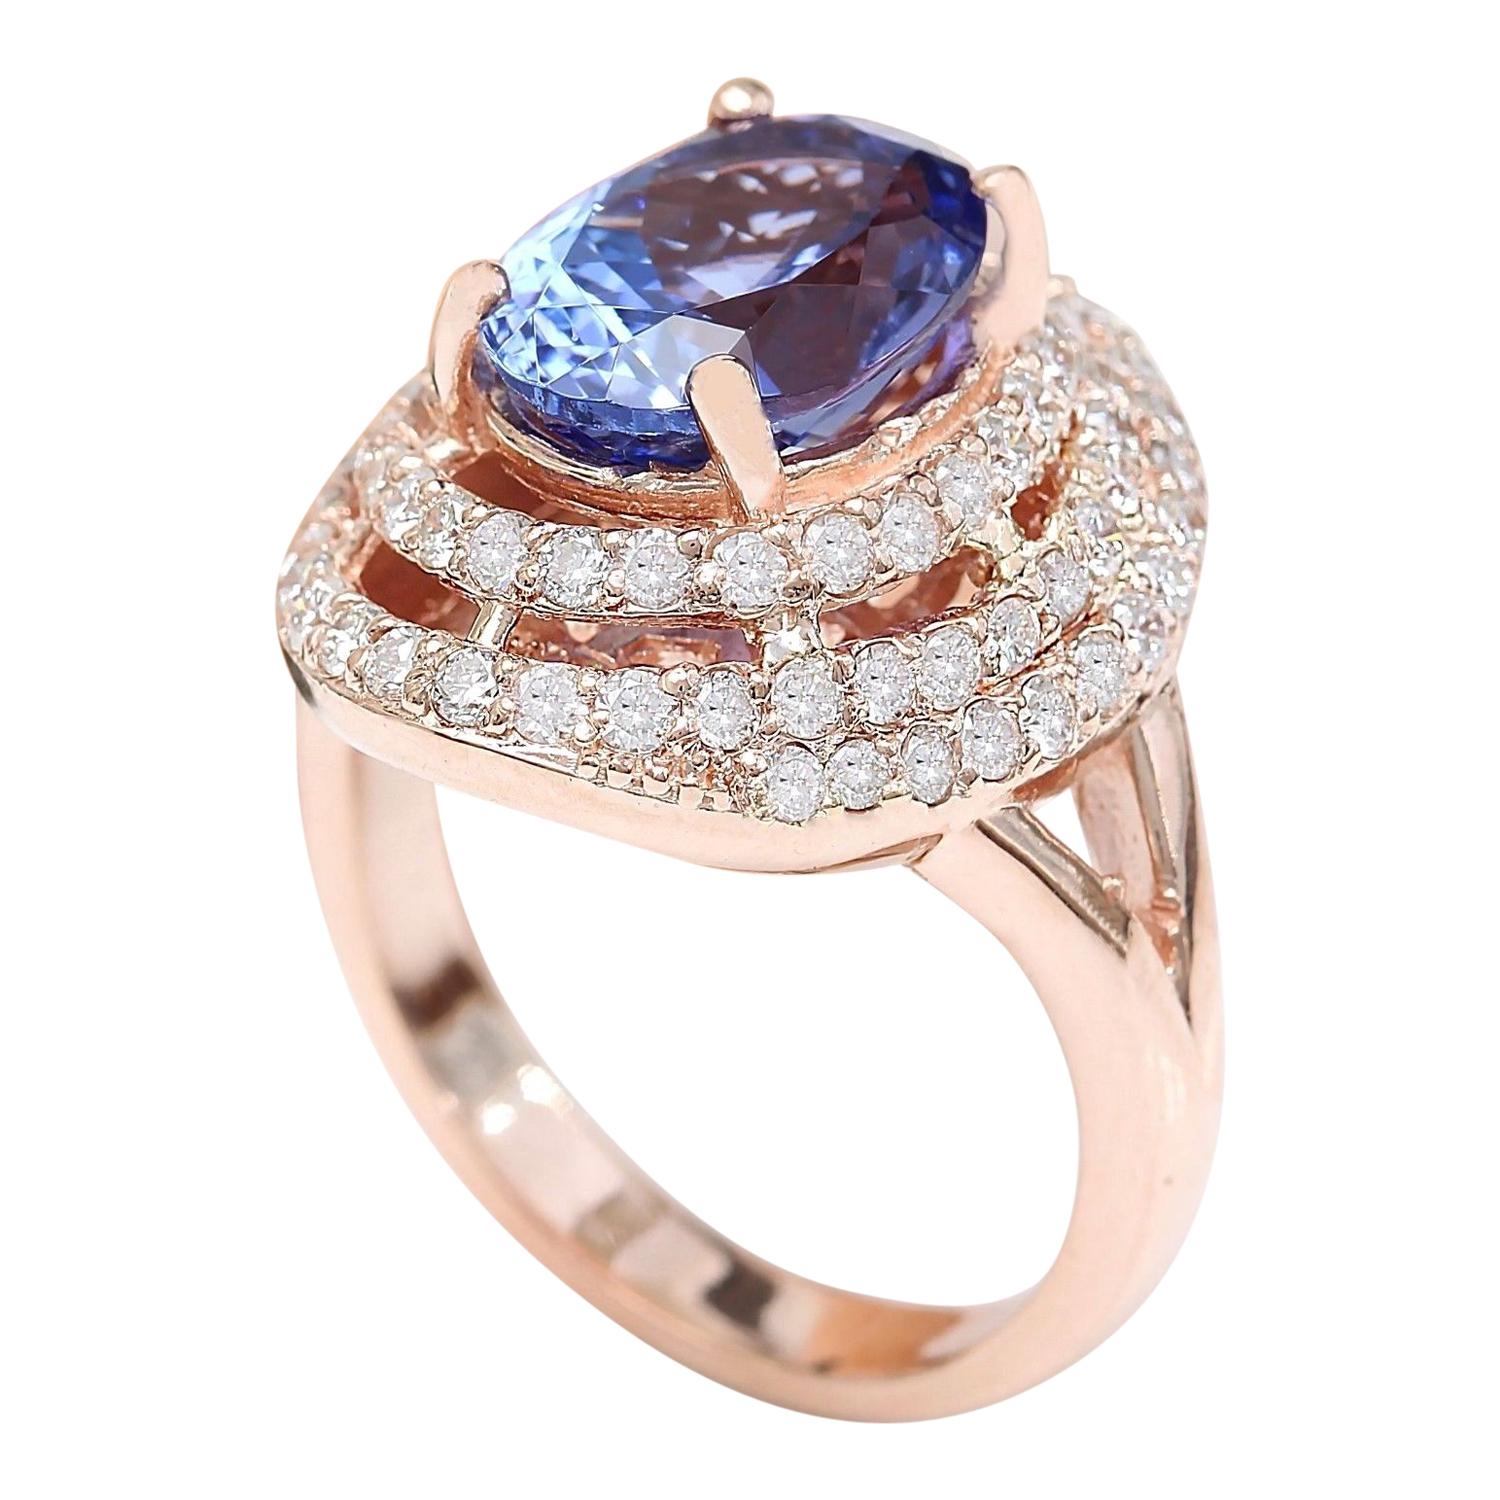 Exquisite Natural Tanzanite Diamond Ring In 14 Karat Solid Rose Gold  In New Condition For Sale In Los Angeles, CA